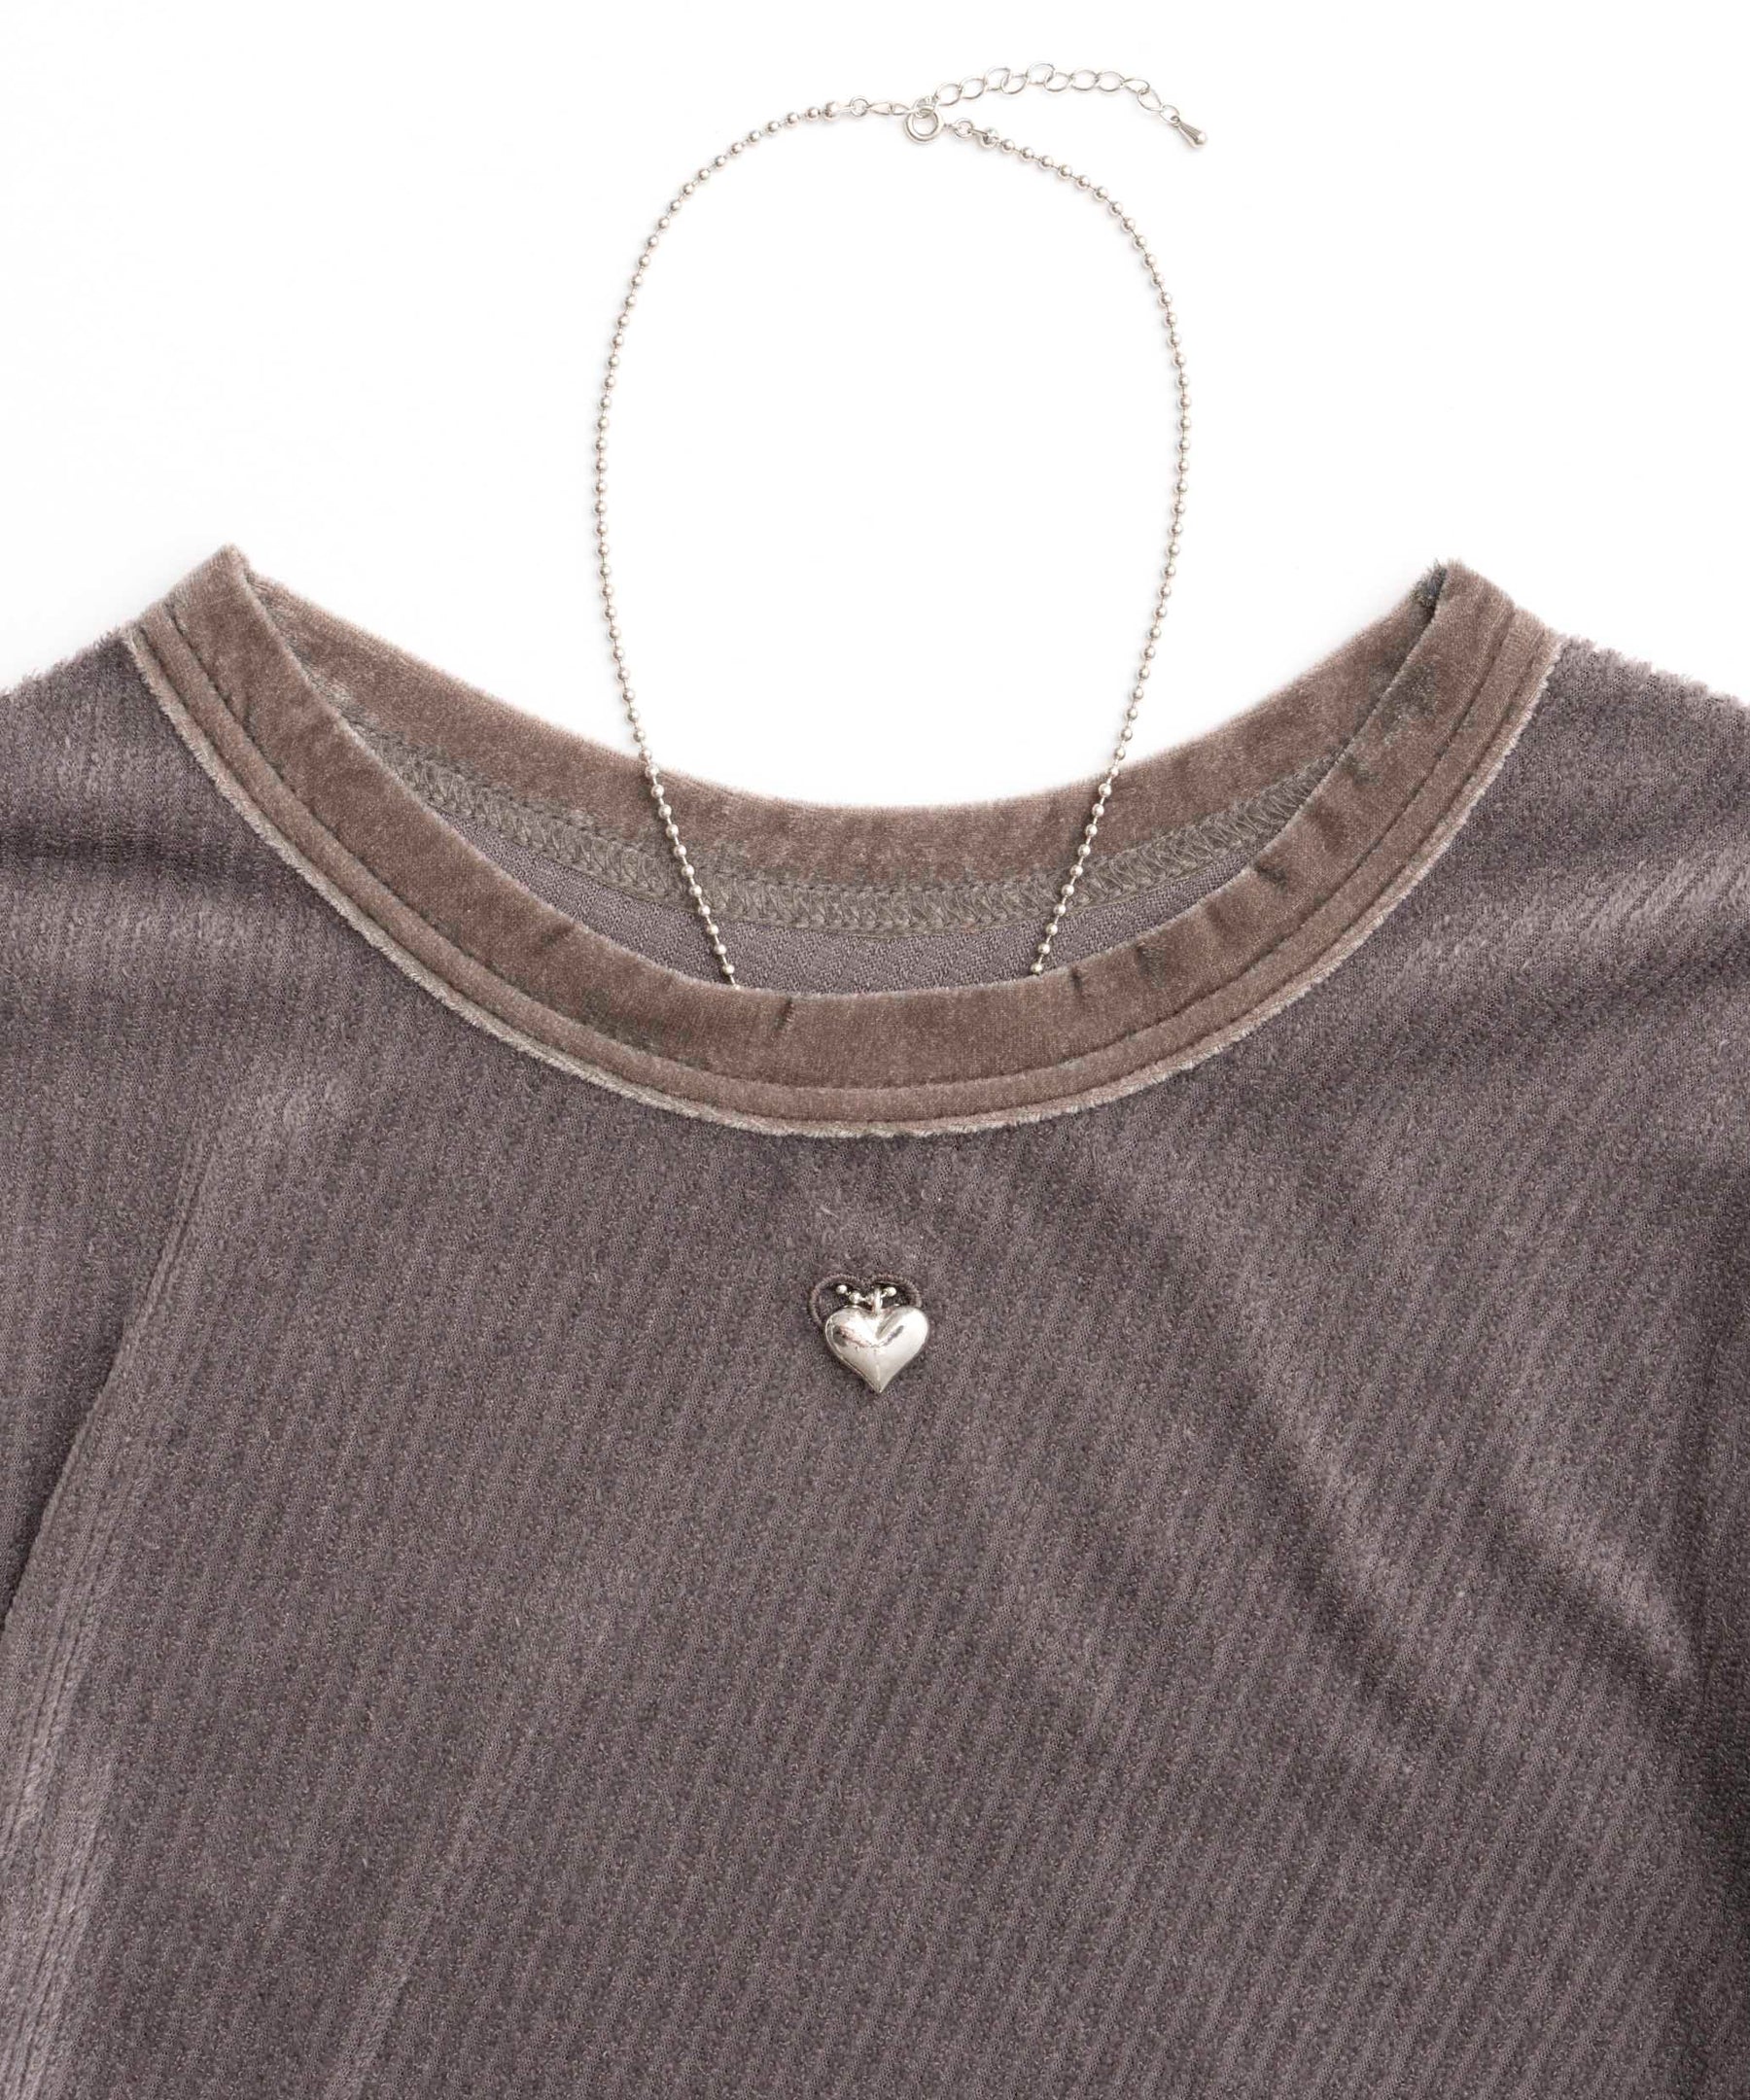 【24AUTUMN PRE-ORDER】With Heart Necklace Velor Tops